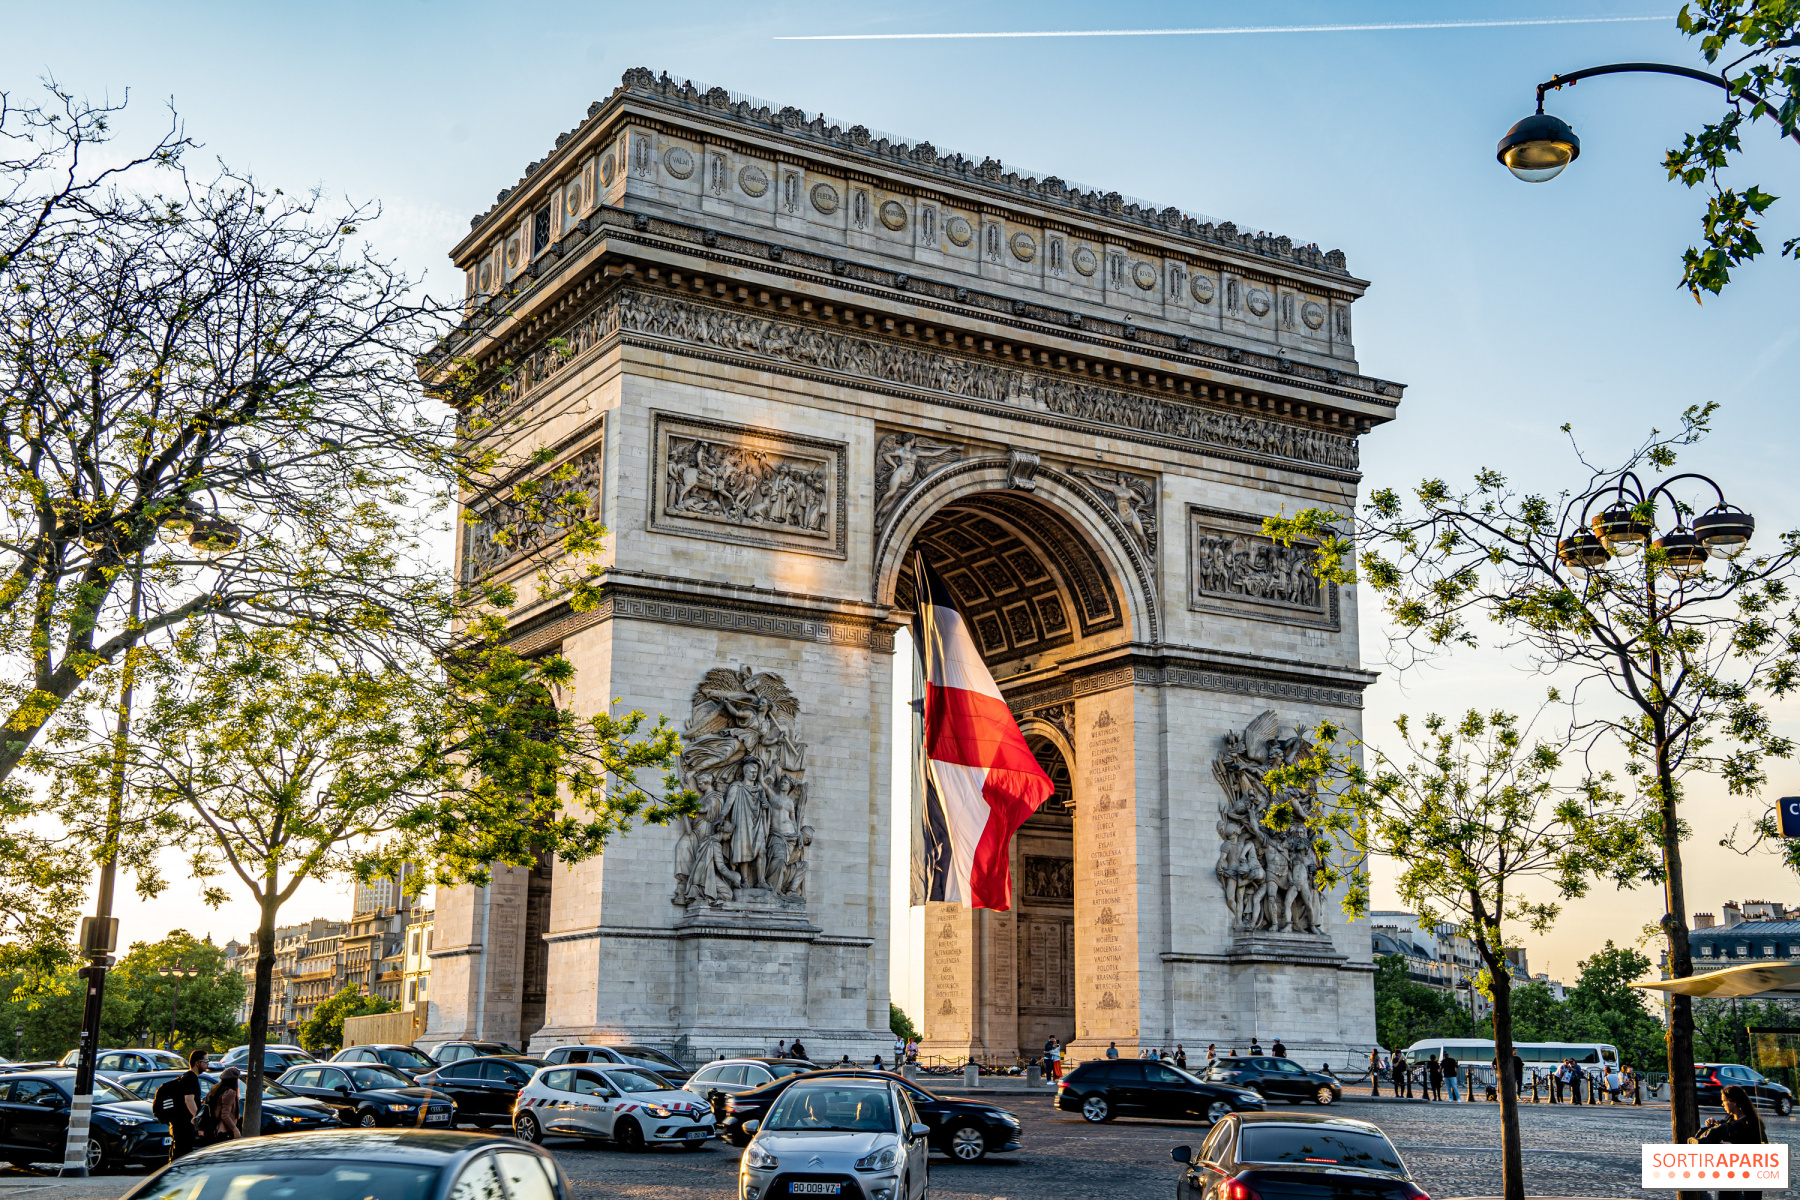 What to do near the Champs-Elysées and the Arc de Triomphe: Our